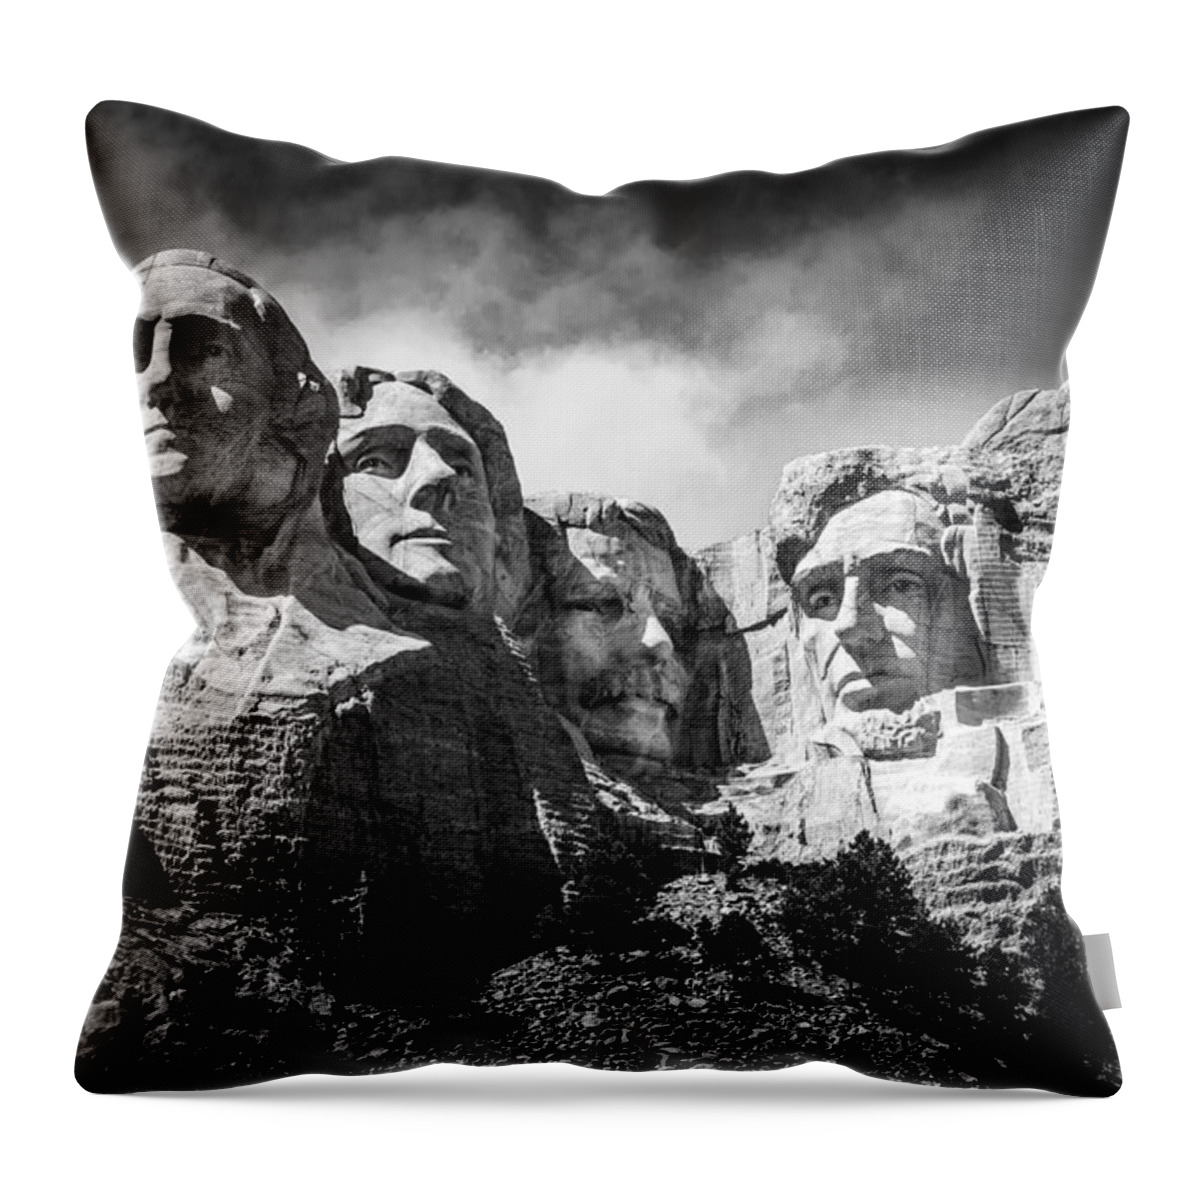 Mount Rushmore National Memorial In Black & White. Mount Rushmore Throw Pillow featuring the photograph Mount Rushmore National Memorial in Black and White by Debra Martz